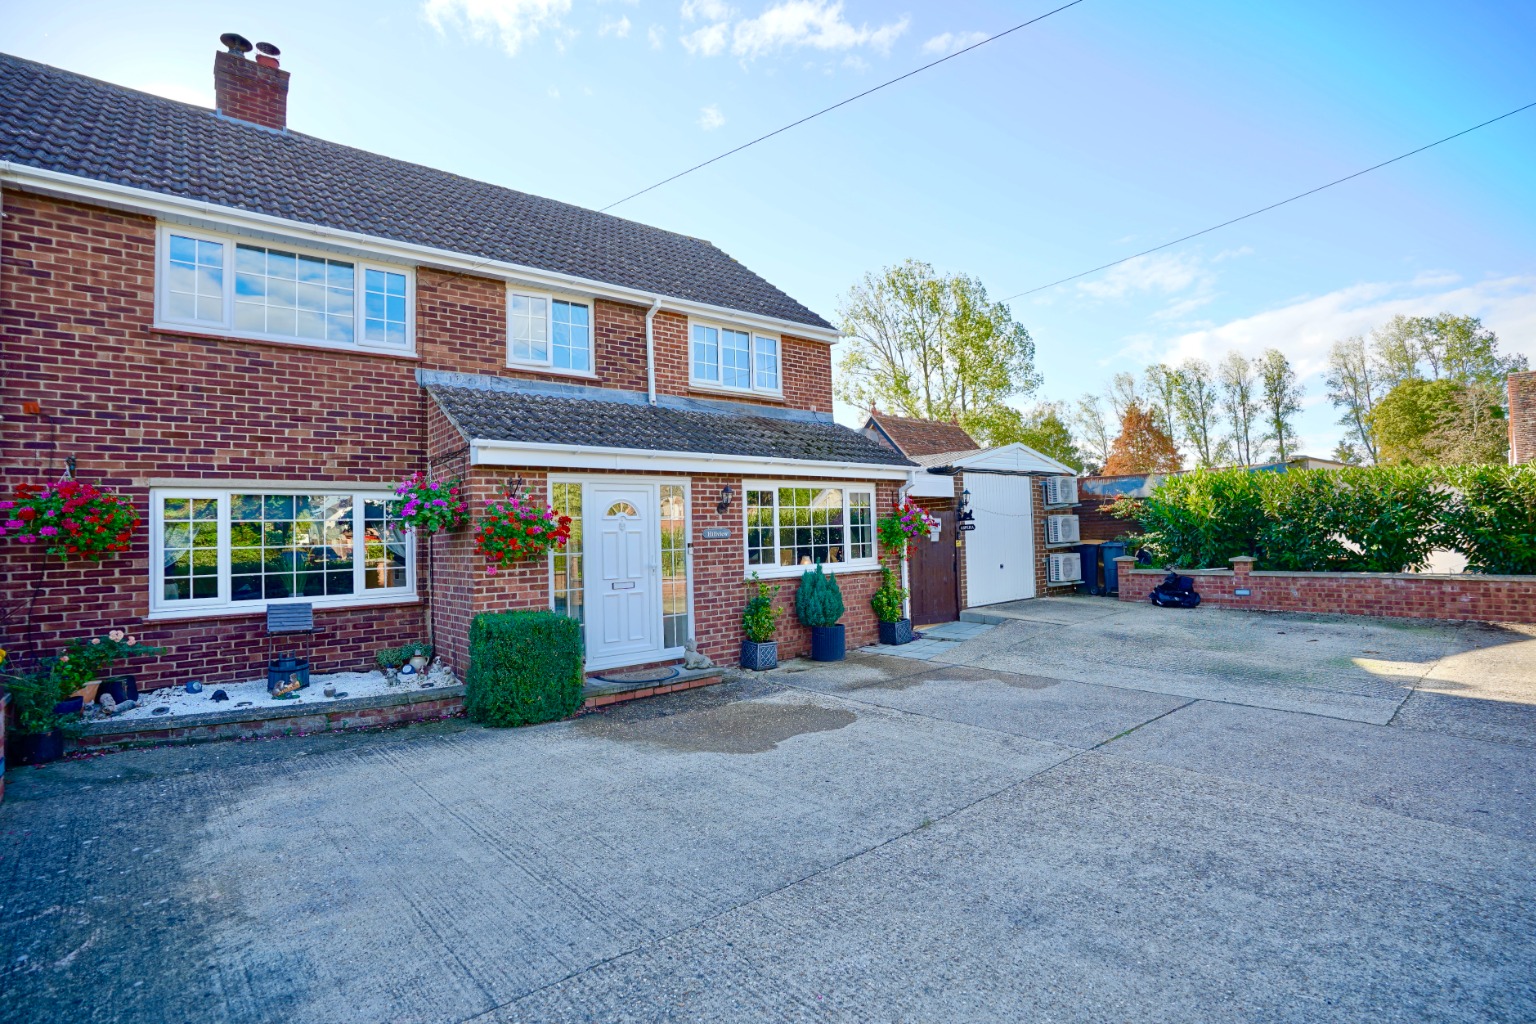 4 bed semi-detached house for sale in Church Road, Bedford 0